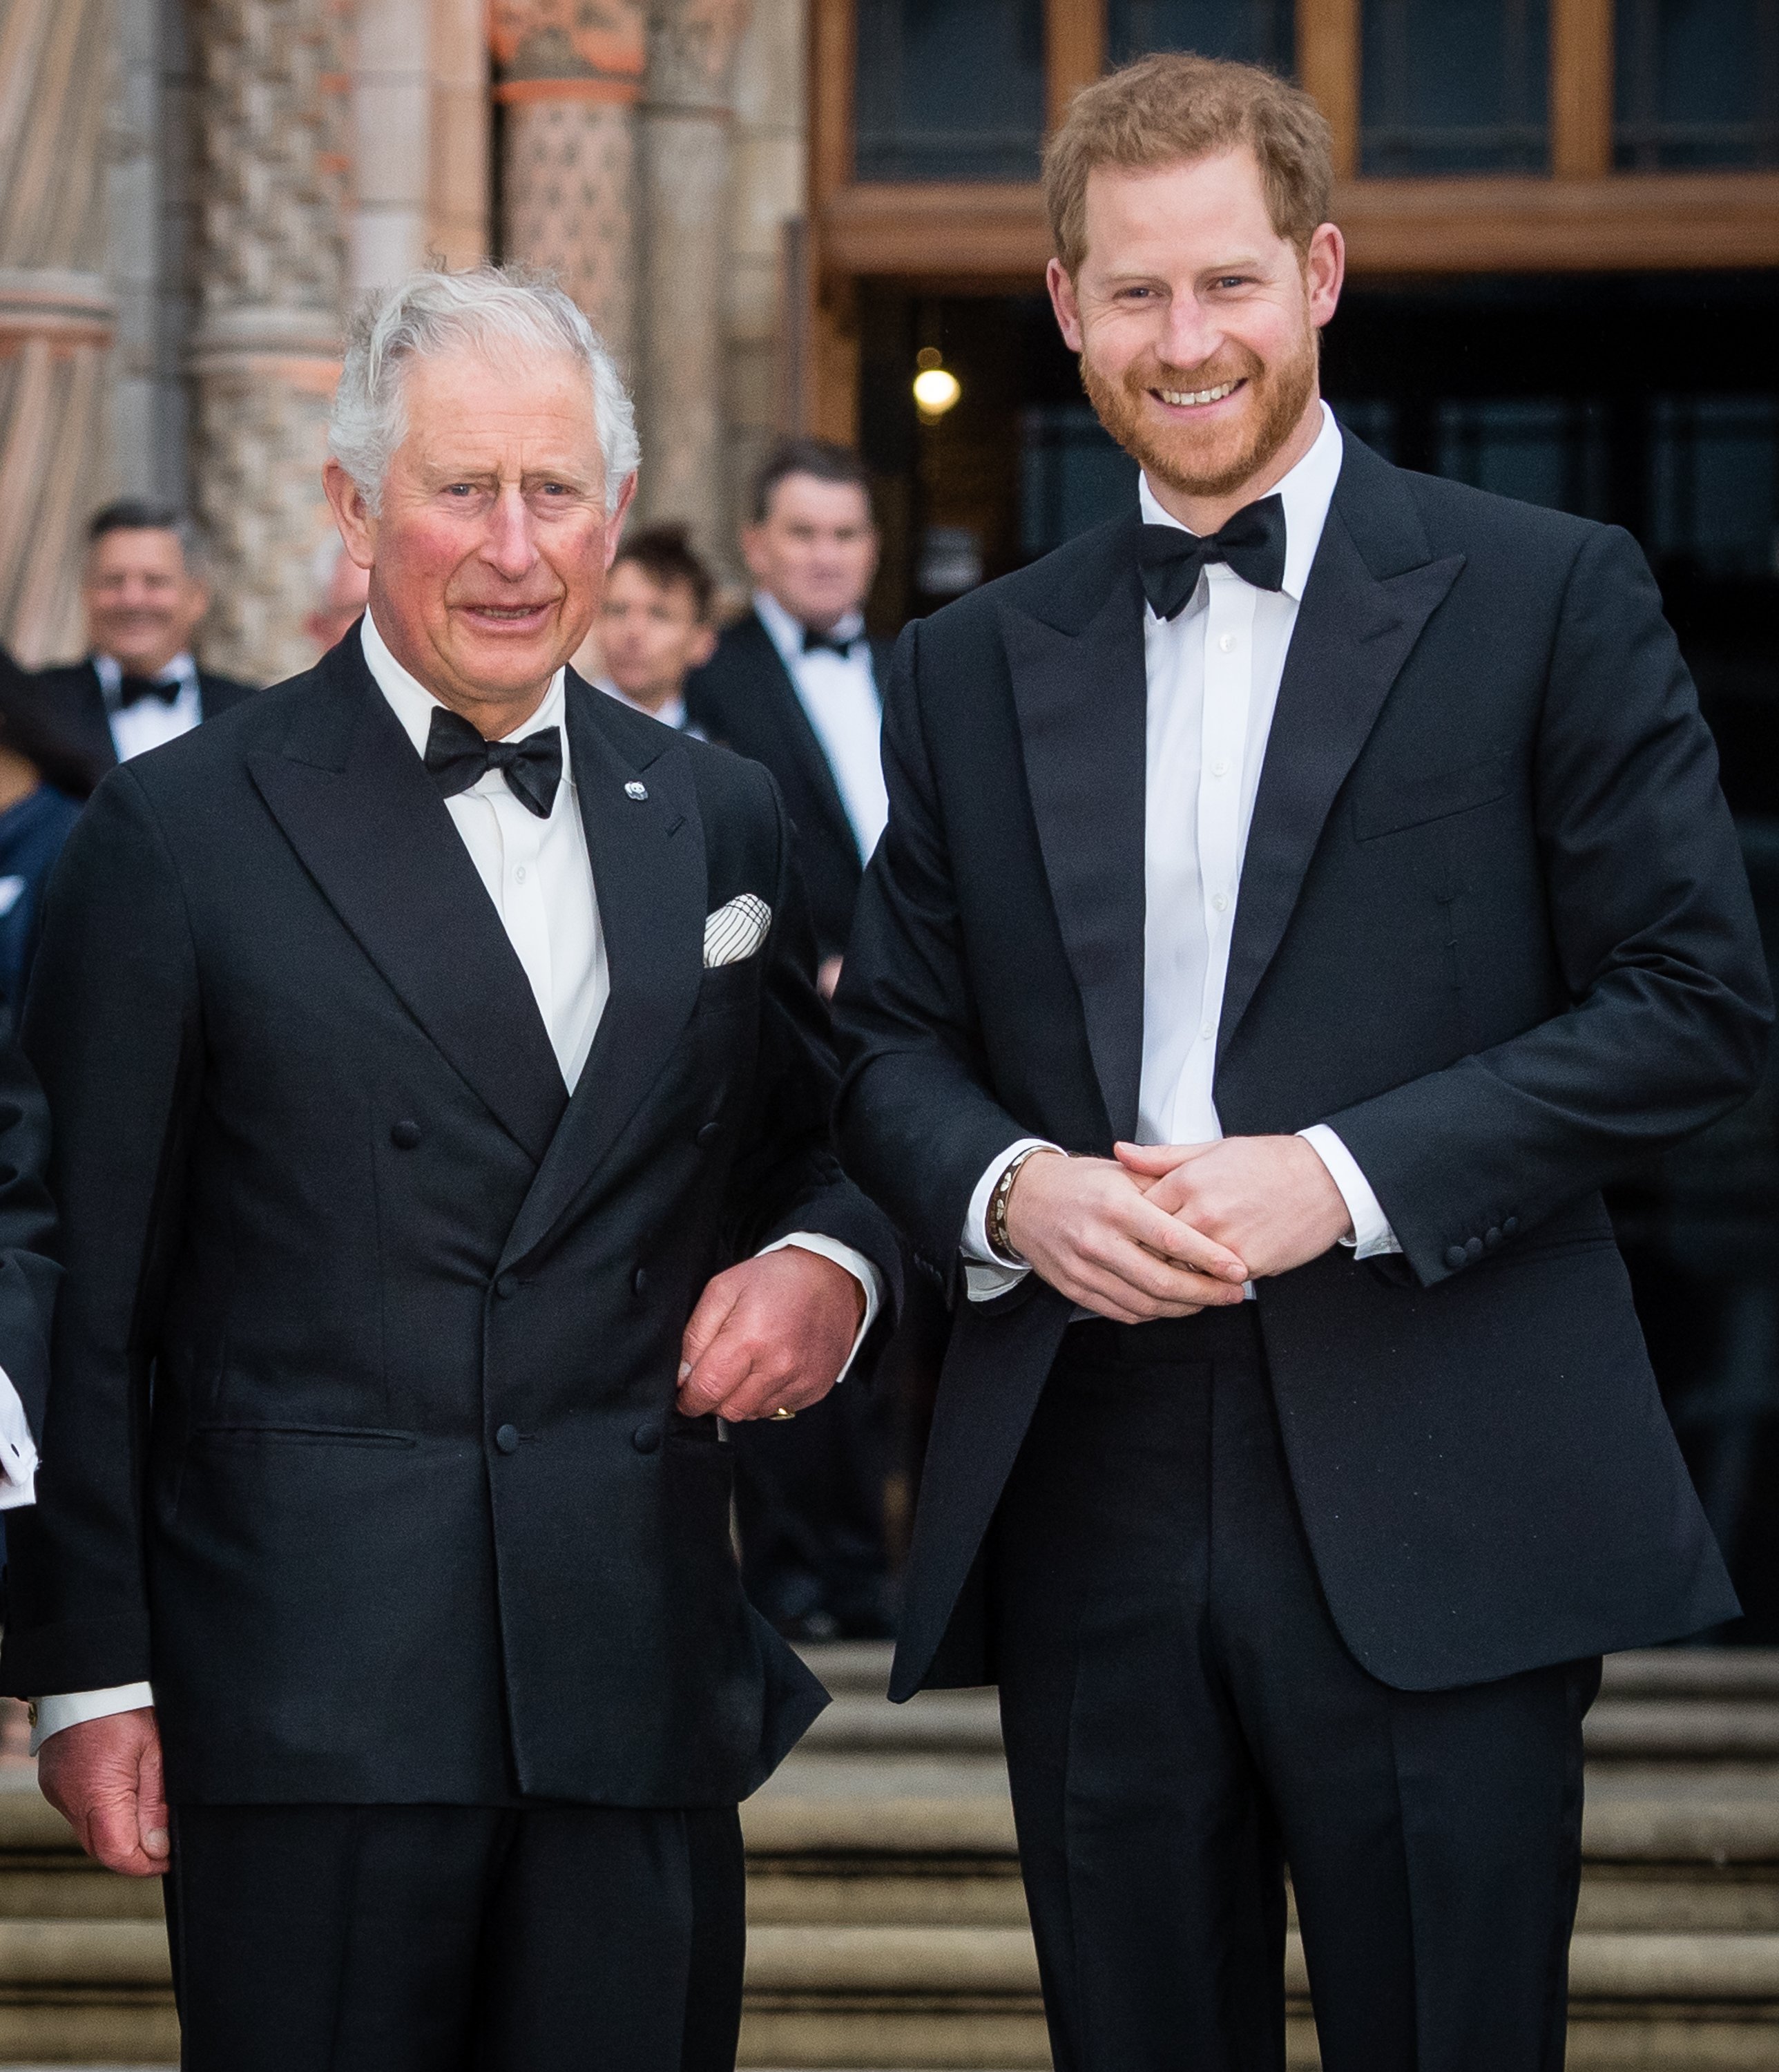 Prince Charles, Prince of Wales and Prince Harry, Duke of Sussex attend the "Our Planet" global premiere at Natural History Museum on April 04, 2019 in London, England | Source: Getty Images 